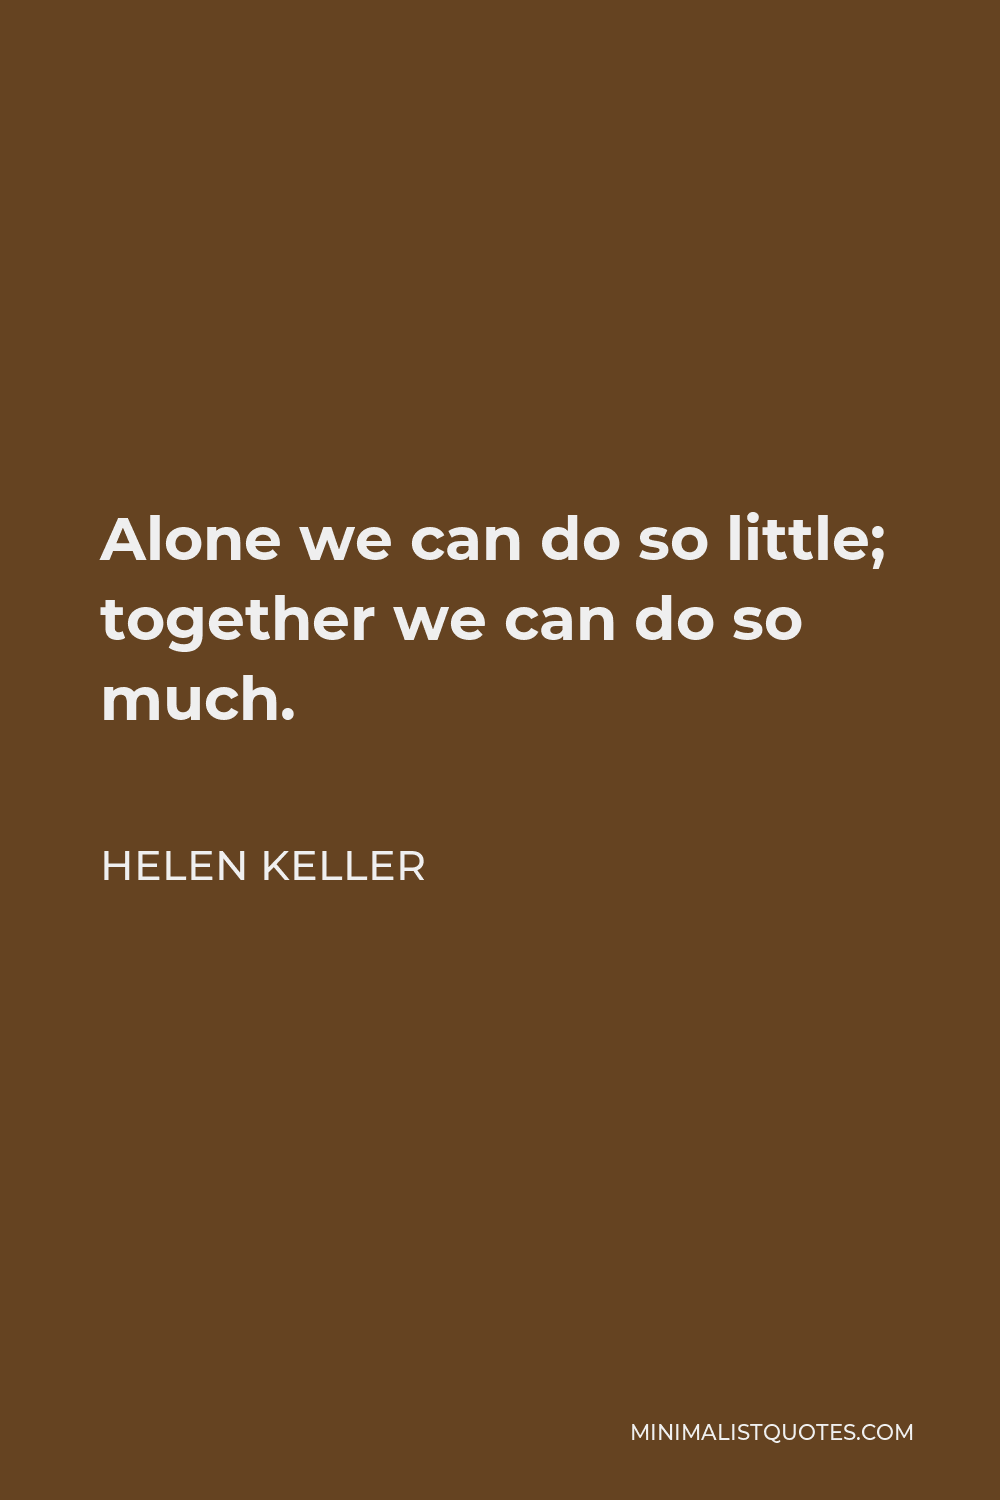 Helen Keller Quote - Alone we can do so little; together we can do so much.